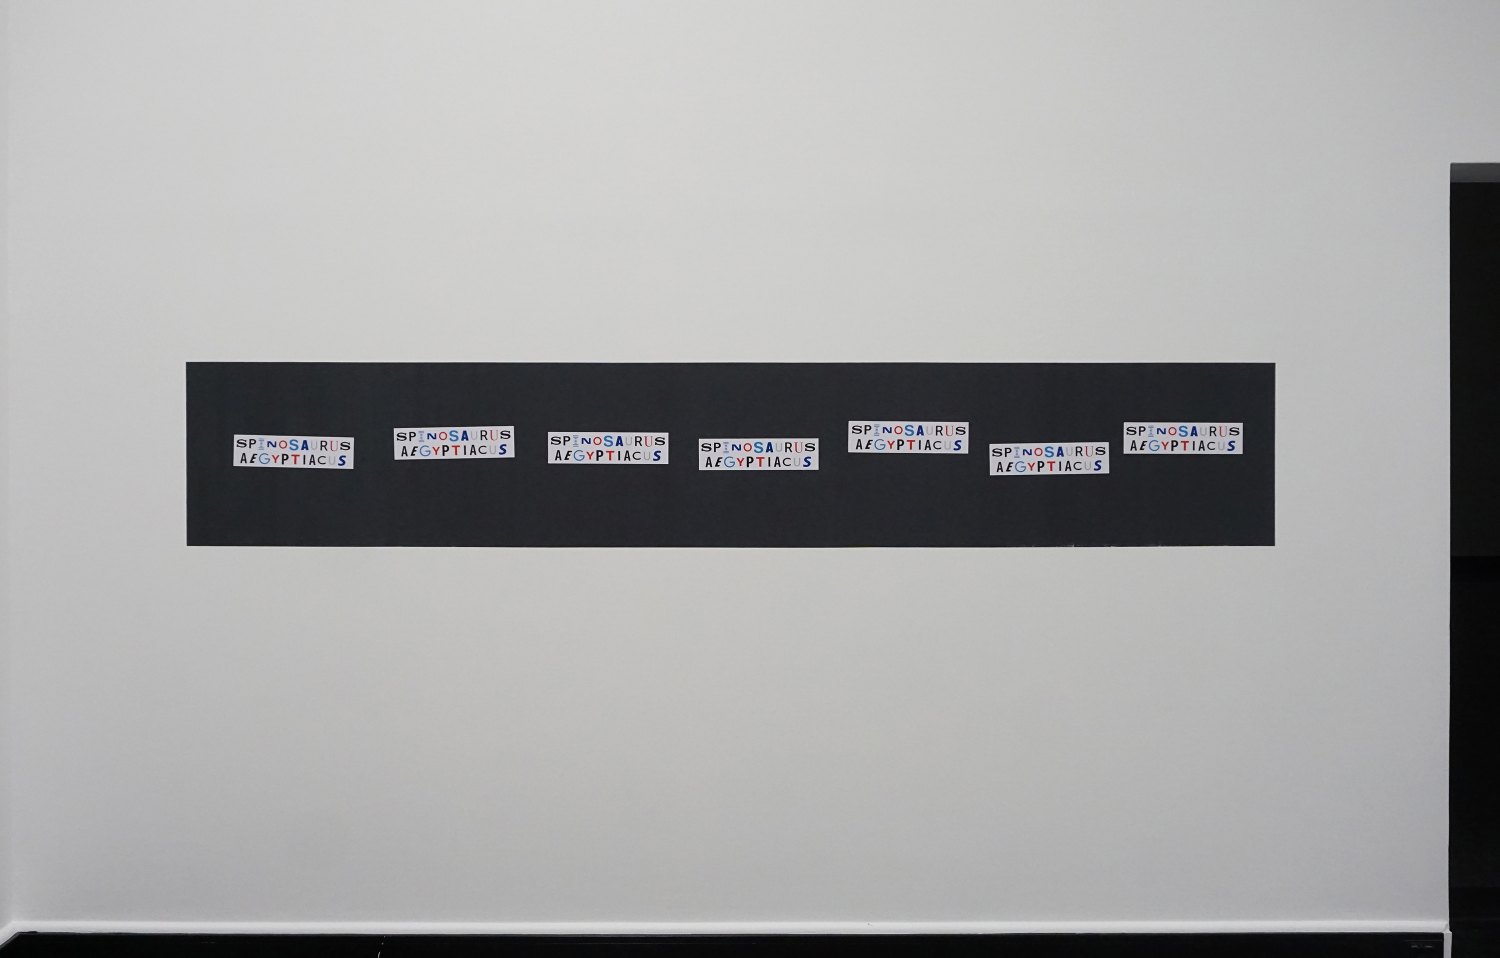 Sean Snyder Spinosaurus Aegyptiacus (Visual Identity), 2018 7 magnetic bumper stickers, 9 x 33 cm, installed on 52 x 300 cm magnetic painted wall